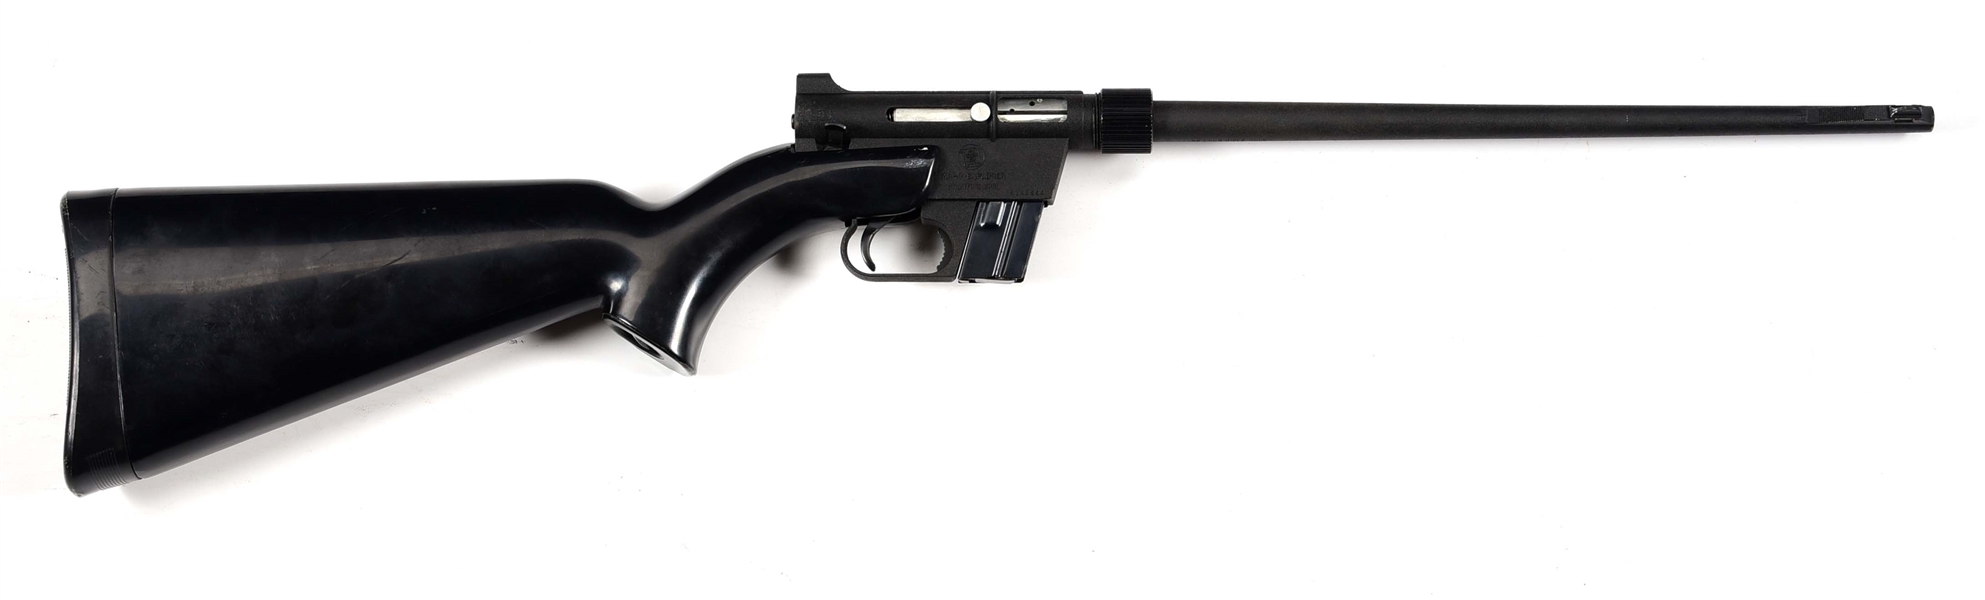 (M) CHARTER ARMS AR-7 SEMI-AUTOMATIC RIFLE